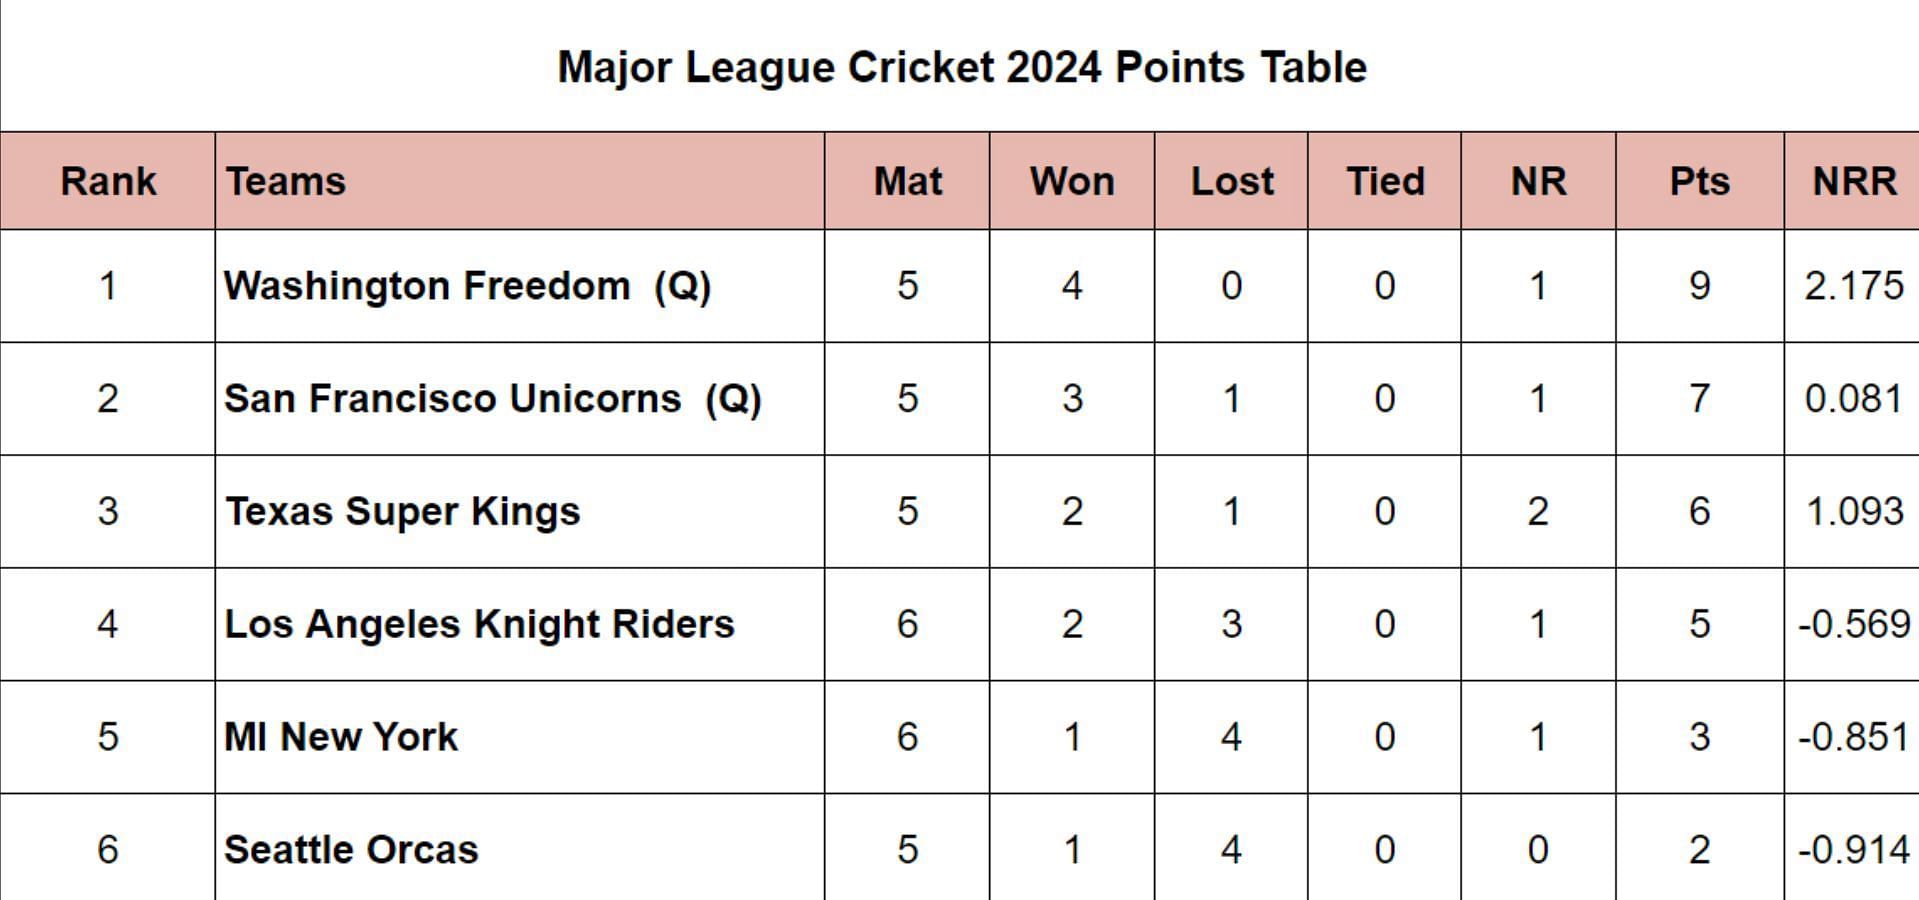 MLC 2024 Points Table: Updated Standings after MI New York vs San Francisco Unicorns, Match 16